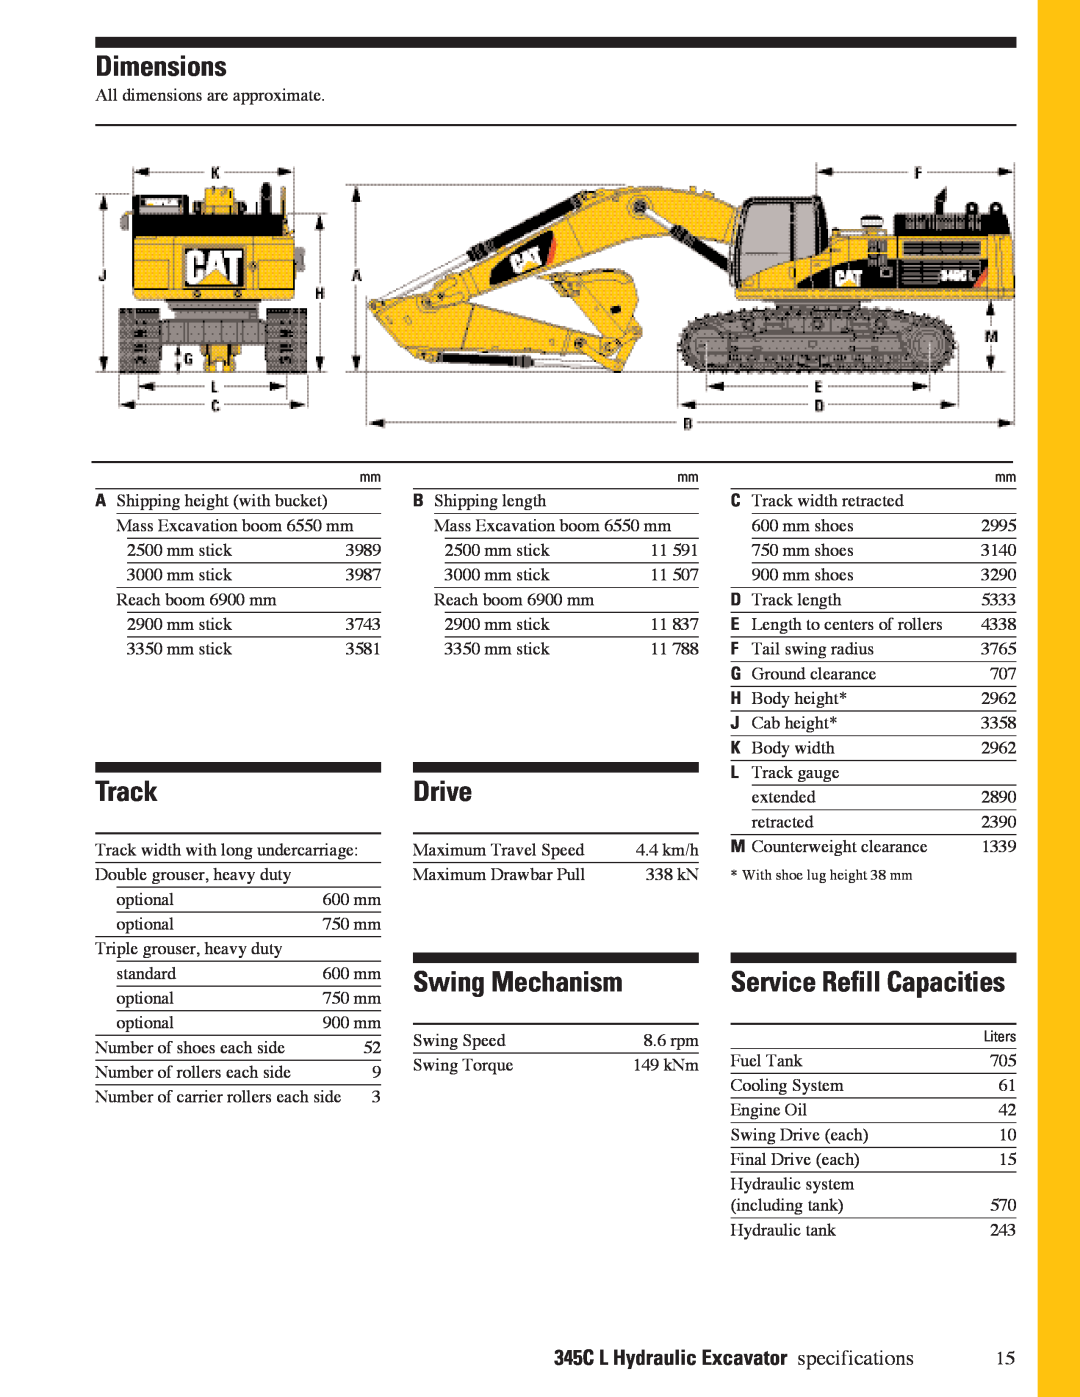 CAT manual Dimensions, TrackDrive, Swing Mechanism, Service Refill Capacities, 345C L Hydraulic Excavator specifications 